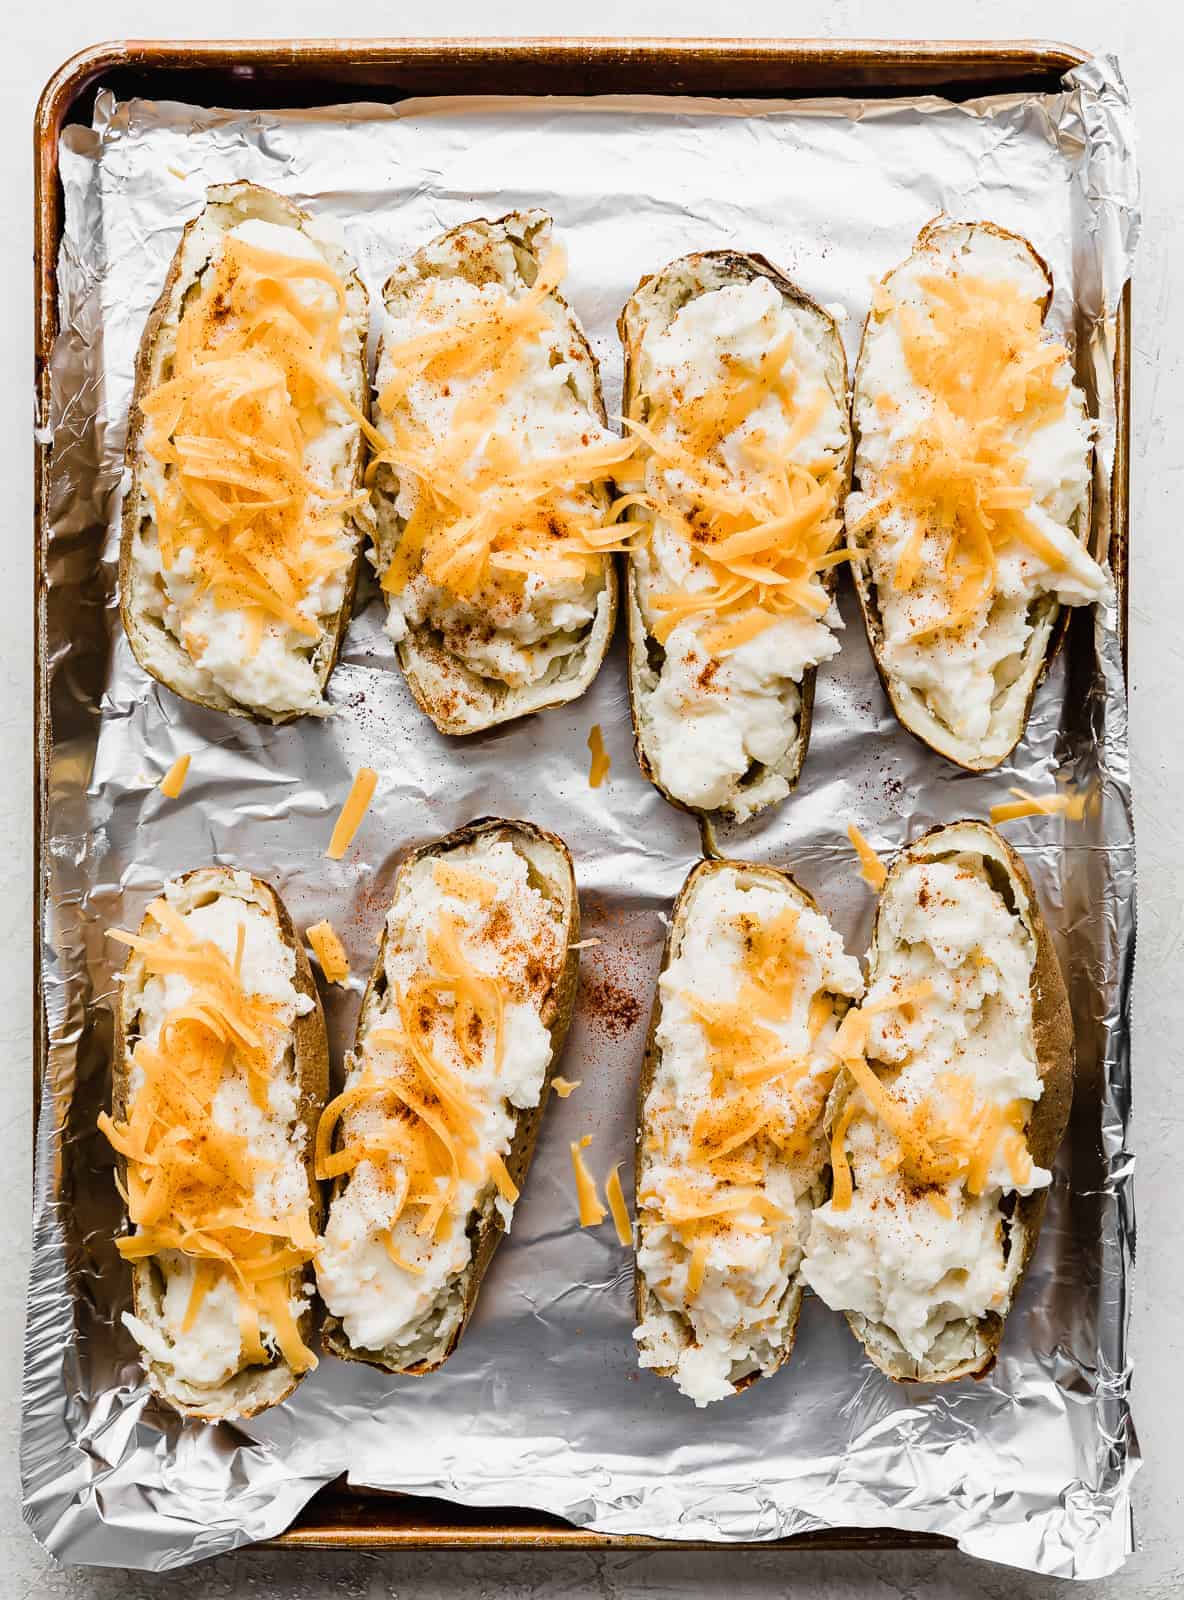 Twice Baked Potatoes topped with shredded cheddar cheese.